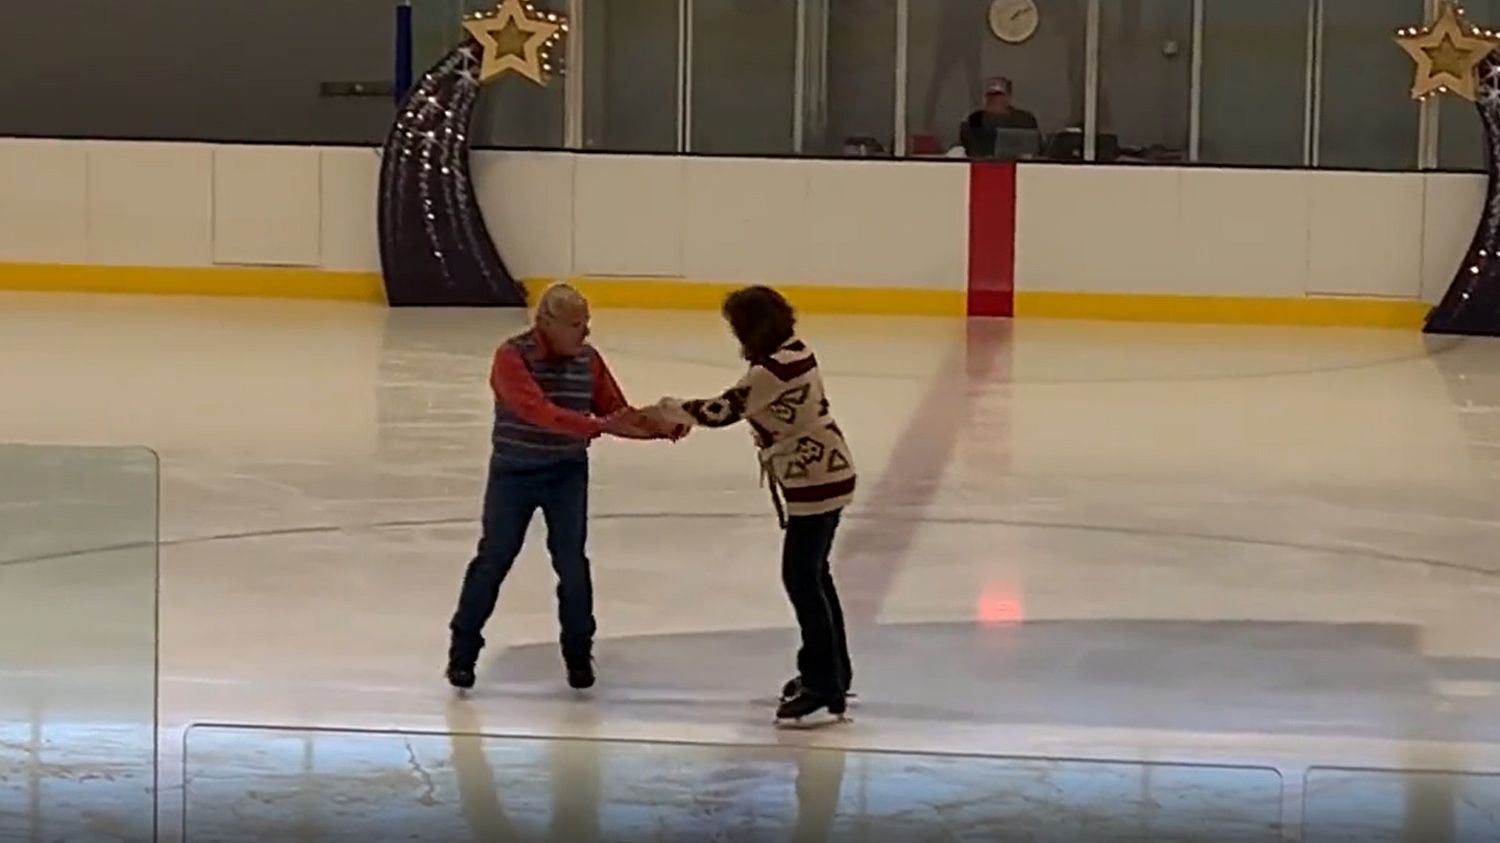 Despite cancer, this American performs his first ice dance gala at the age of 78: his story moves internet users
